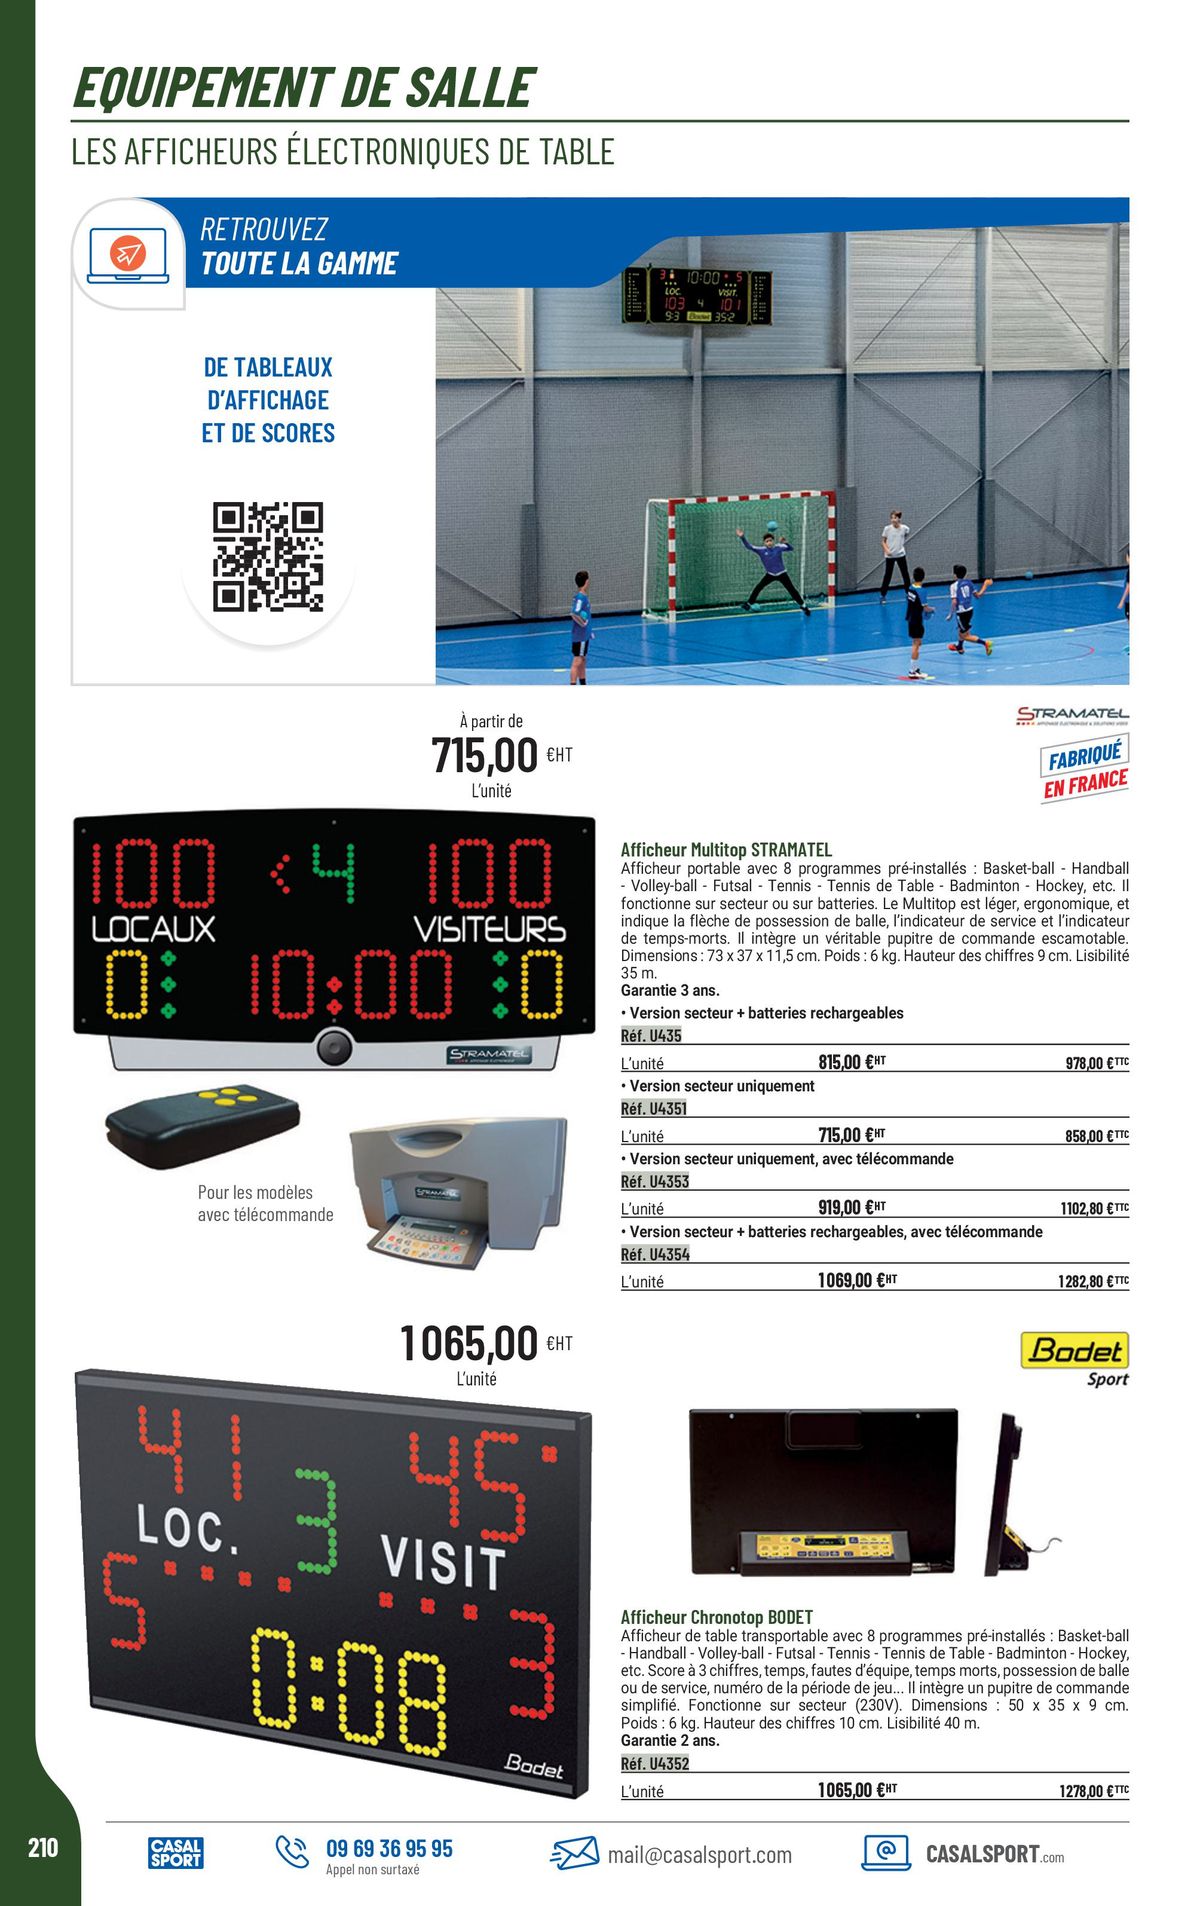 Catalogue Equipement sportif, page 00182